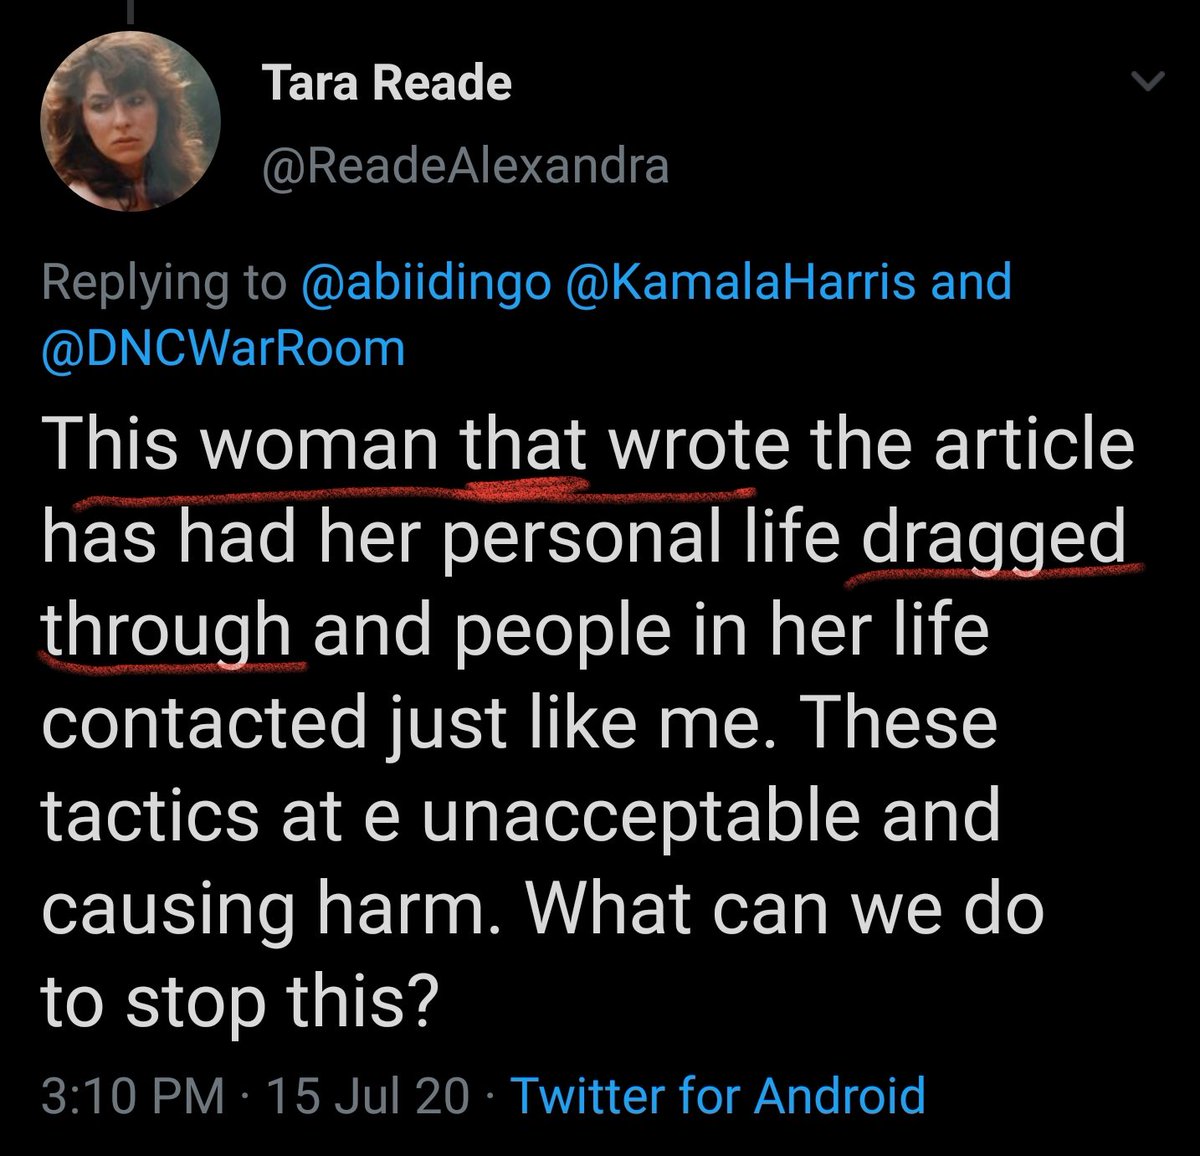 Here's a July update! Just a reminder that this woman did actually graduate from law school (undergrad, not so much). And she only speaks English.______________________________Should be "THE woman WHO wrote THIS article"...And dragged through "the mud".